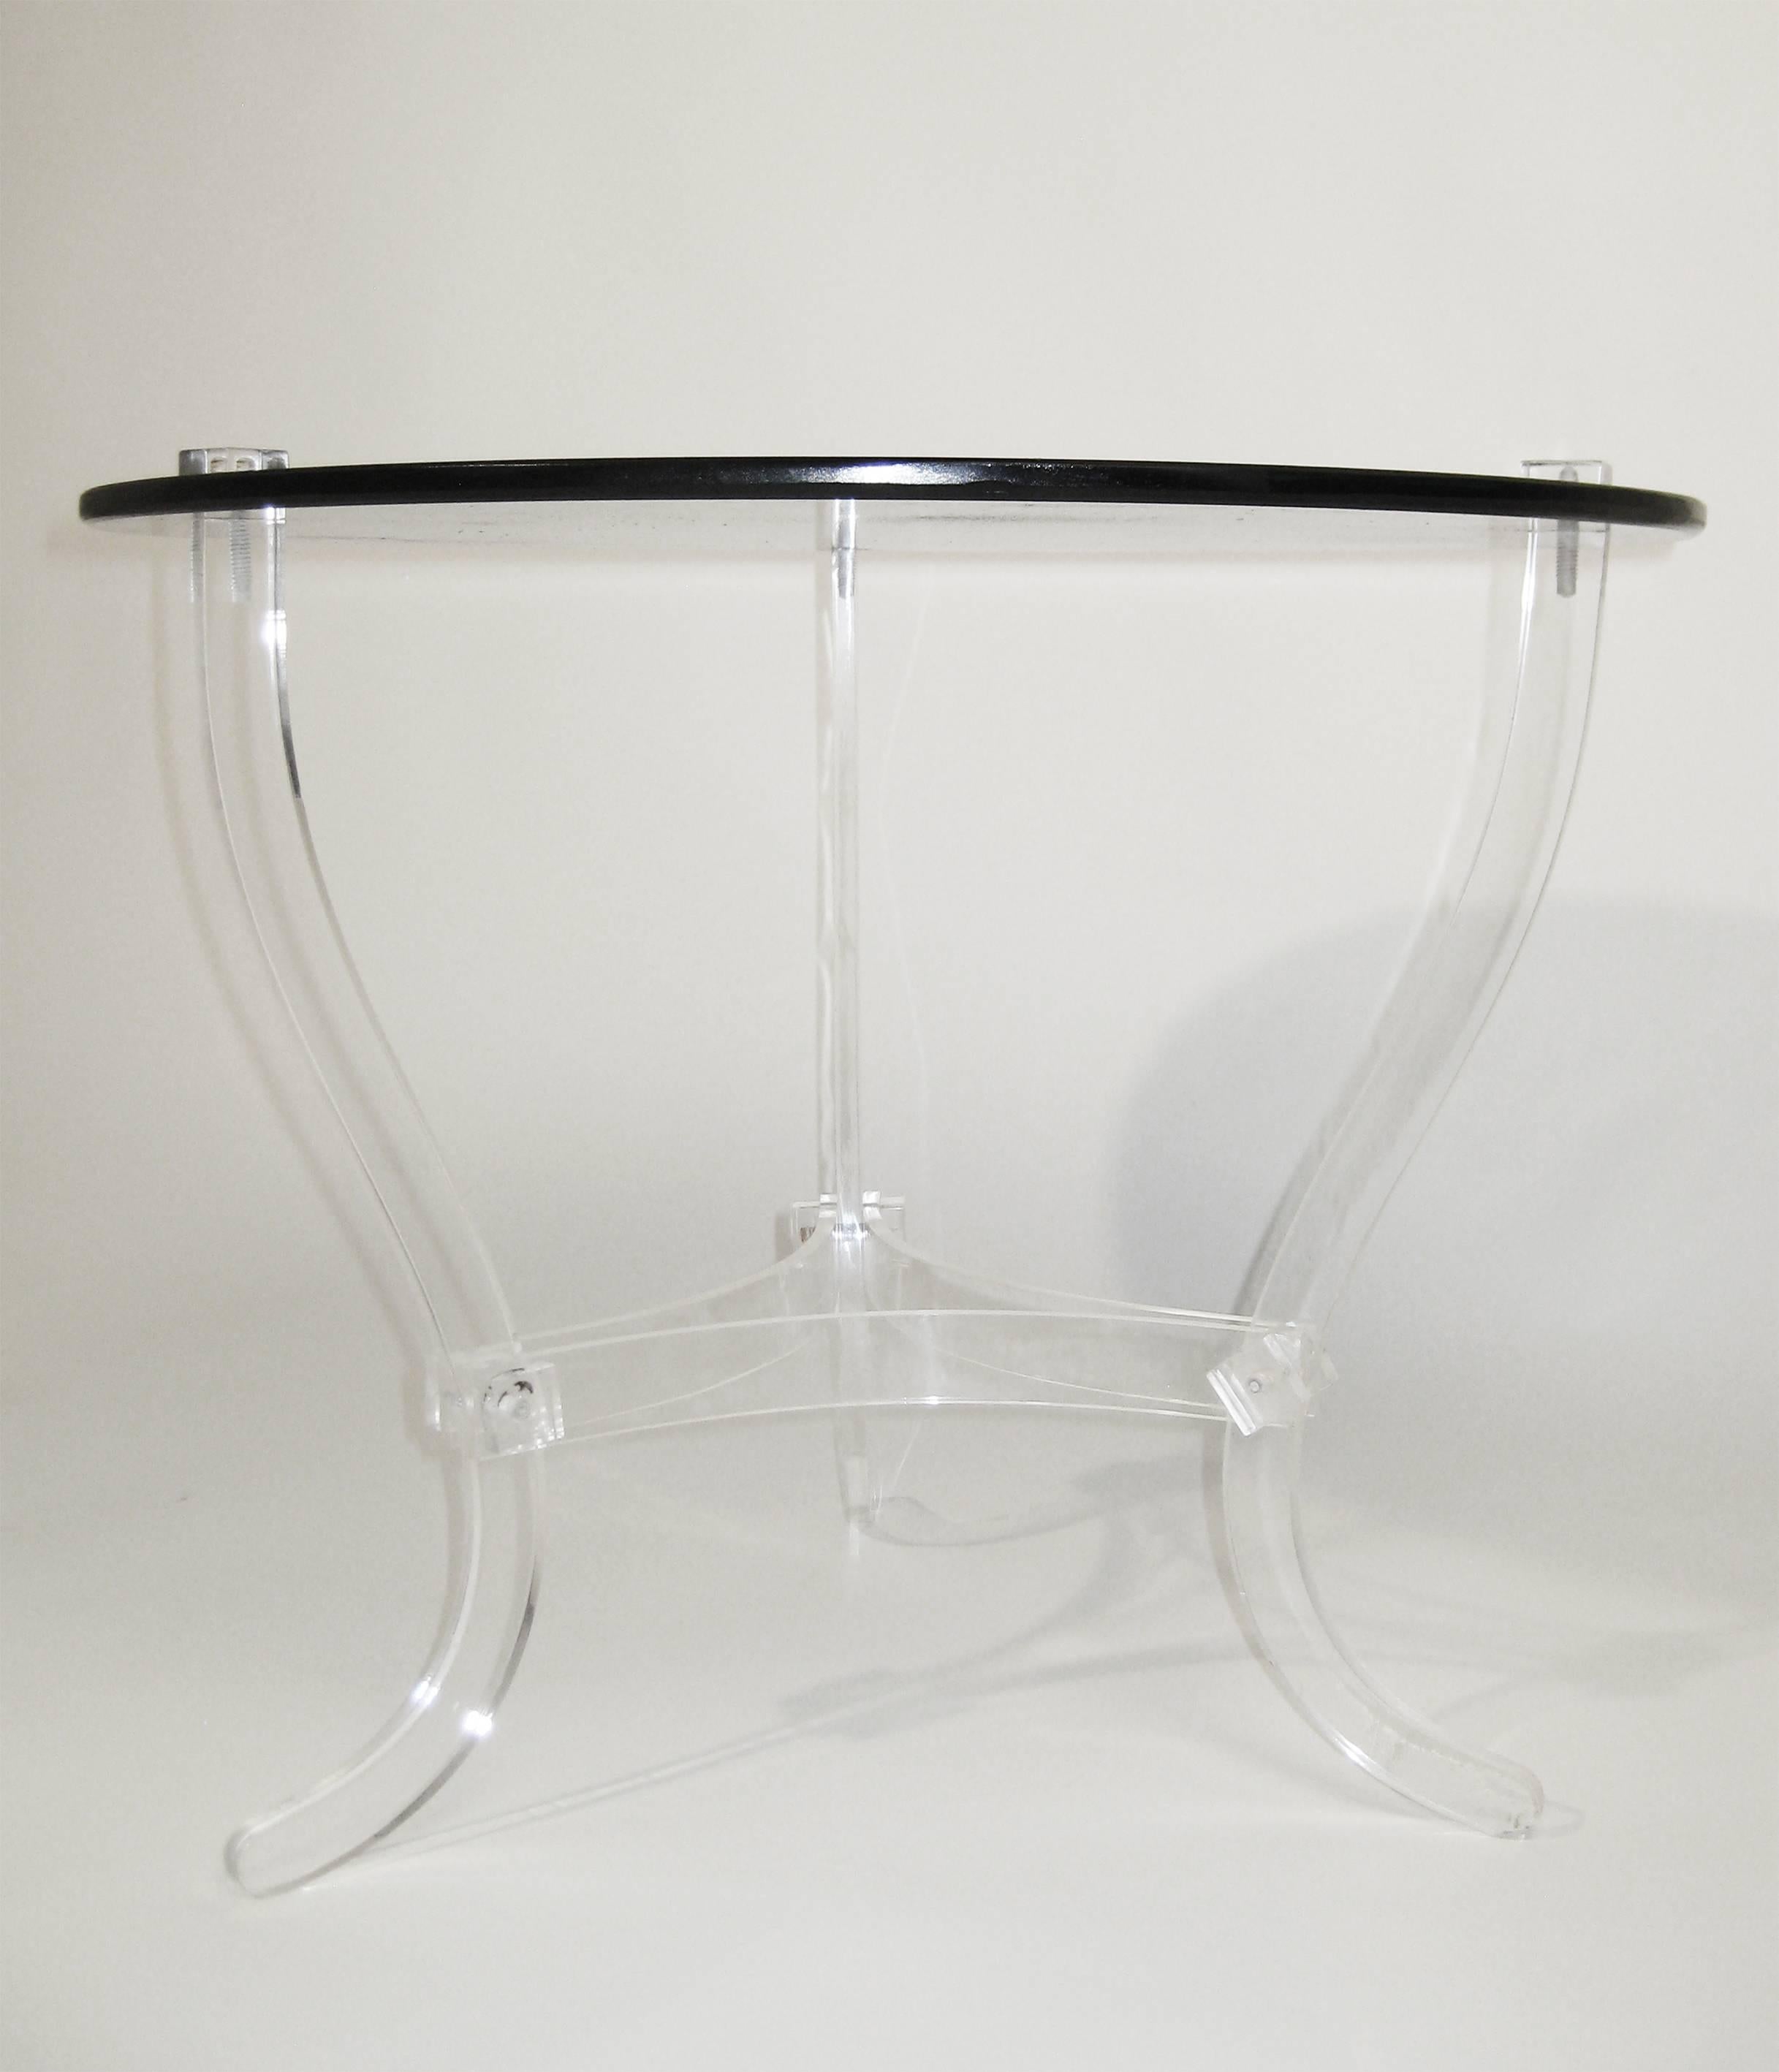 Midcentury Occasional Table, Lucite and Black Vitrolite, Mexico, circa 1965 For Sale 1